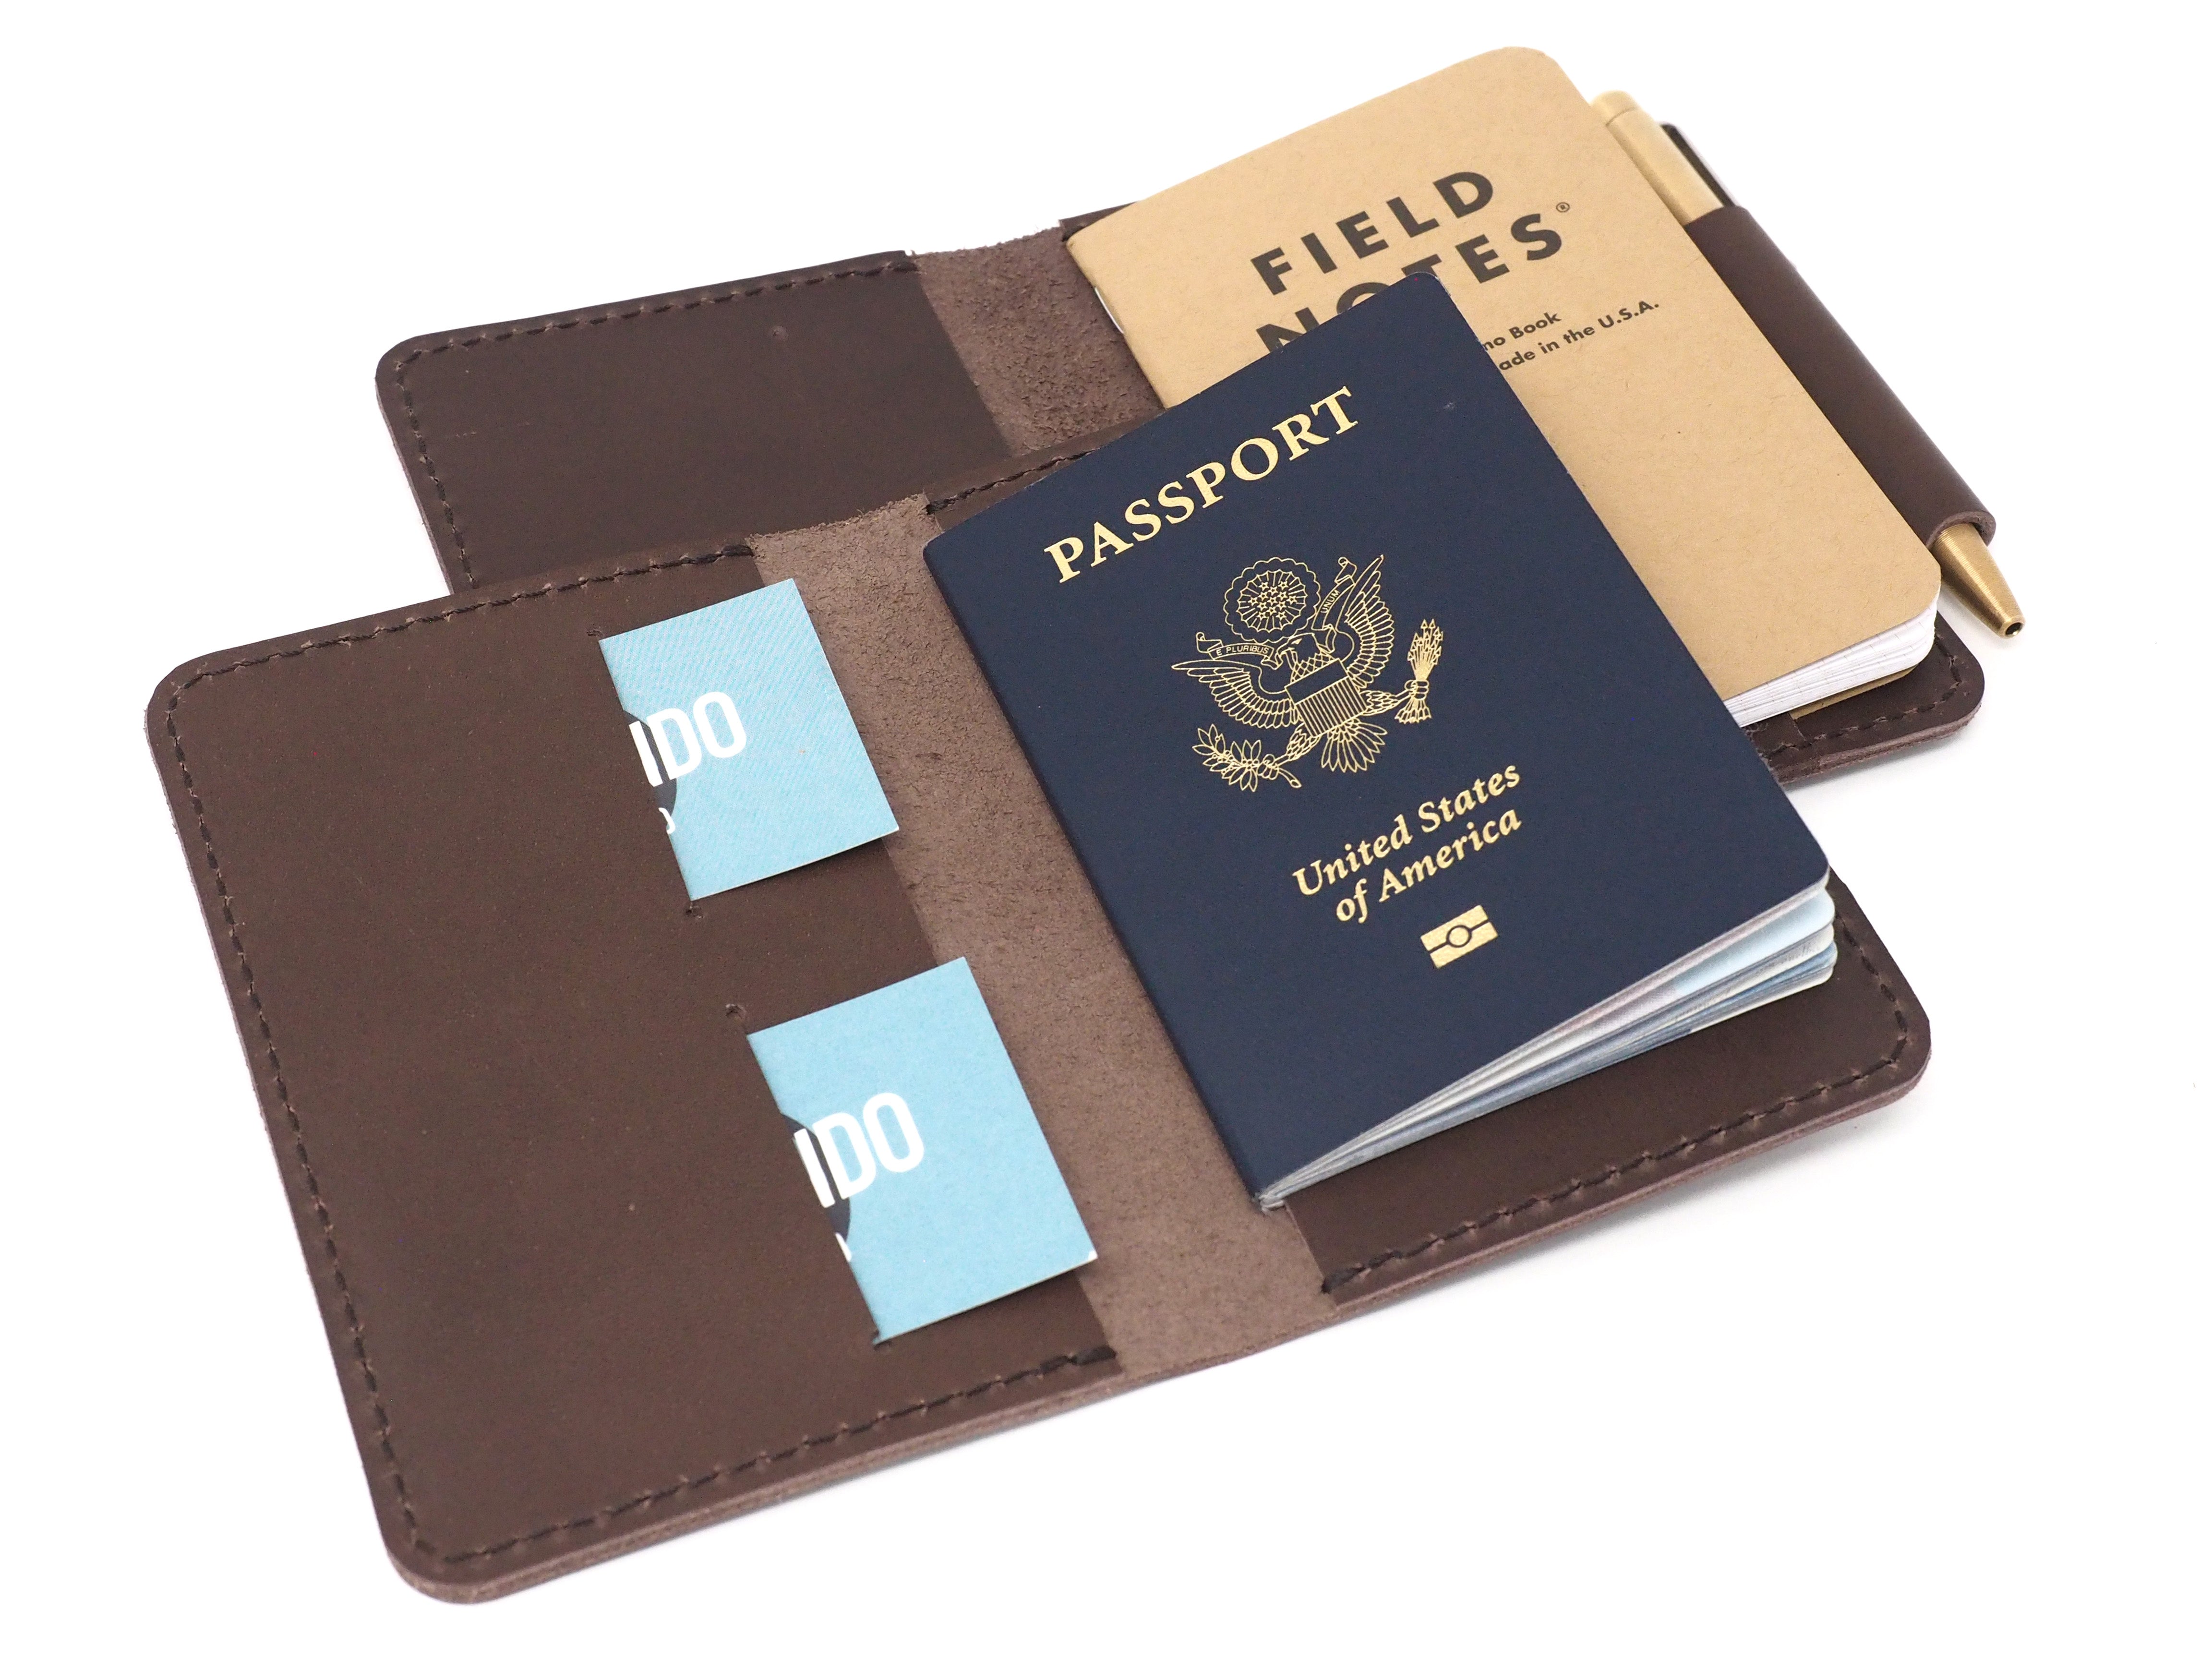 Unique Field Notes Cover Leather Passport Holder Aged Travel Wallet Passport Cover Case